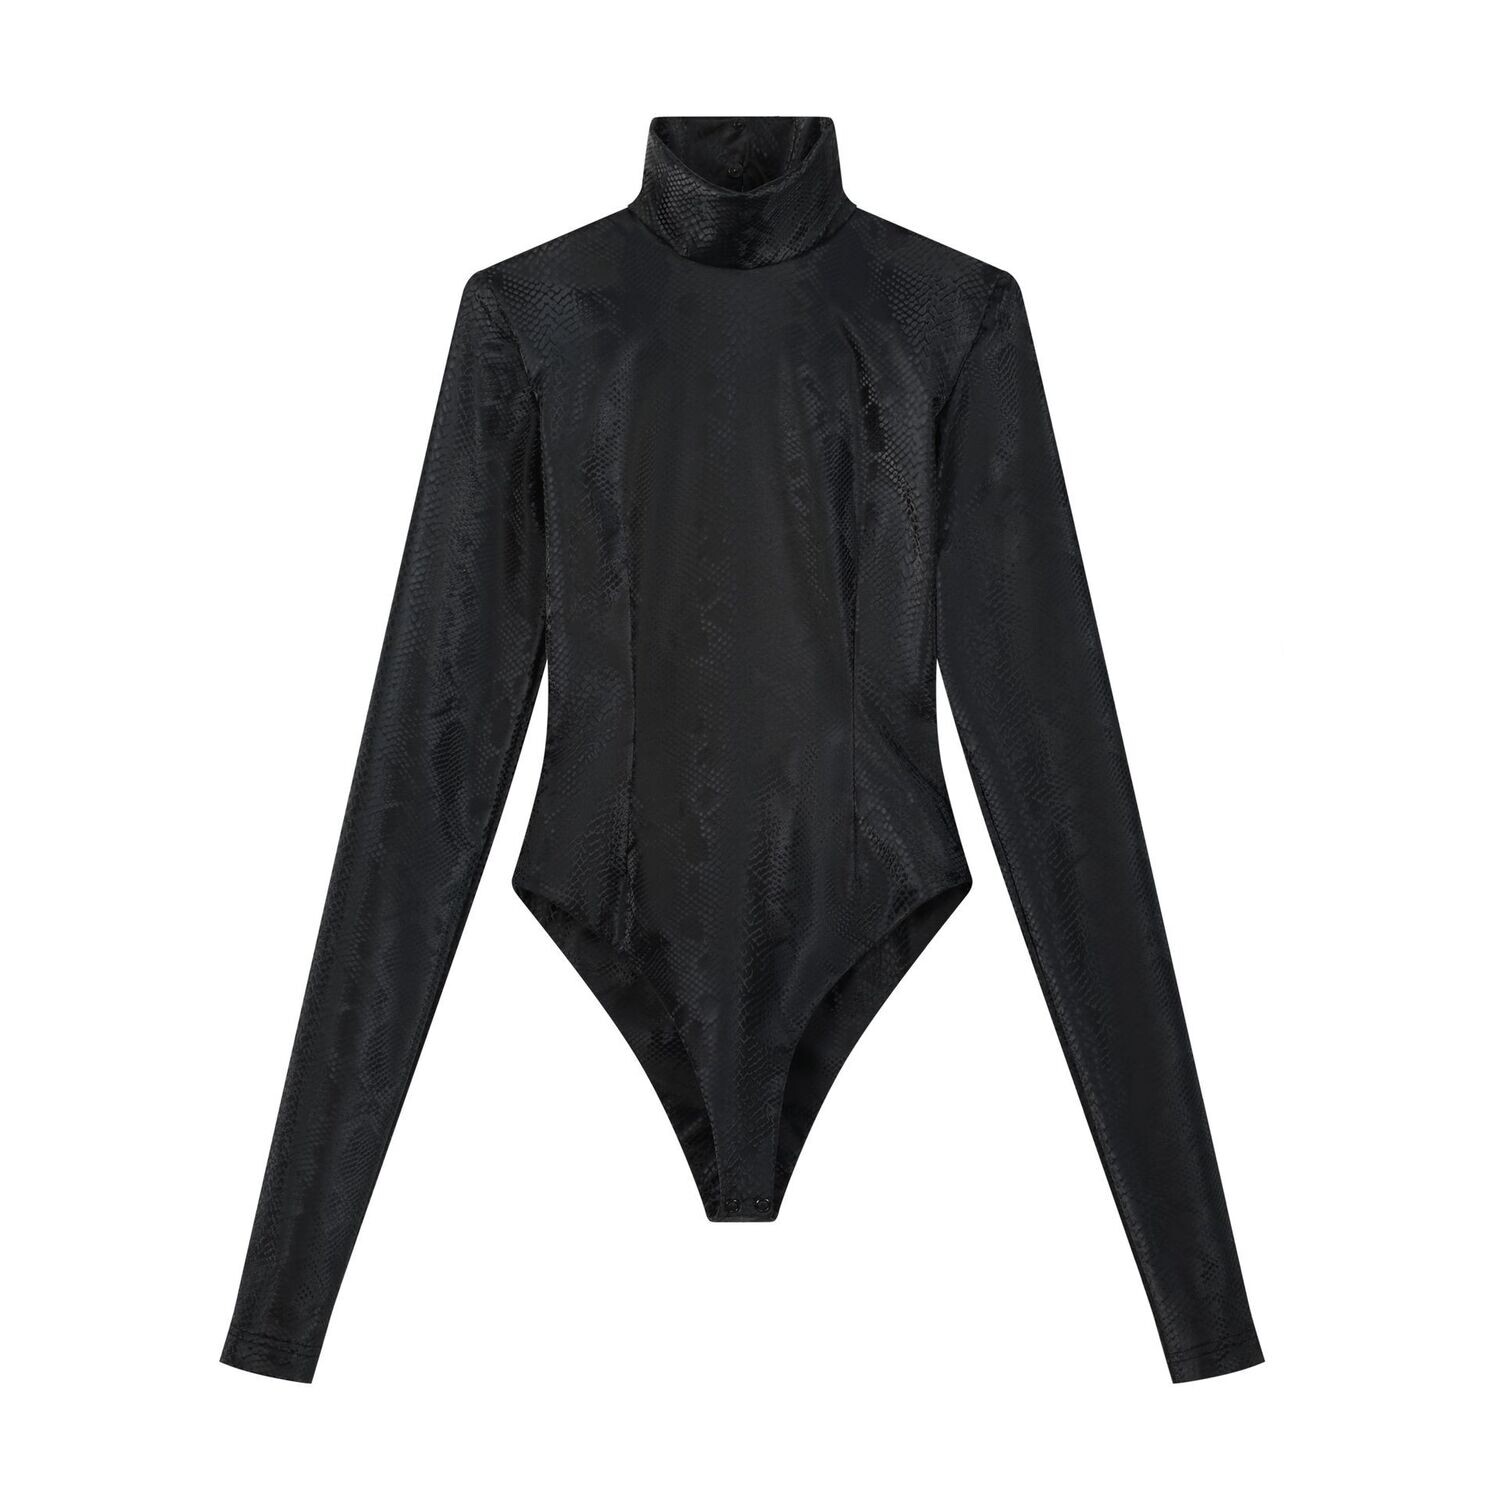 My Hunt for the Perfect Black Turtleneck Ended When I Discovered This  Bodysuit